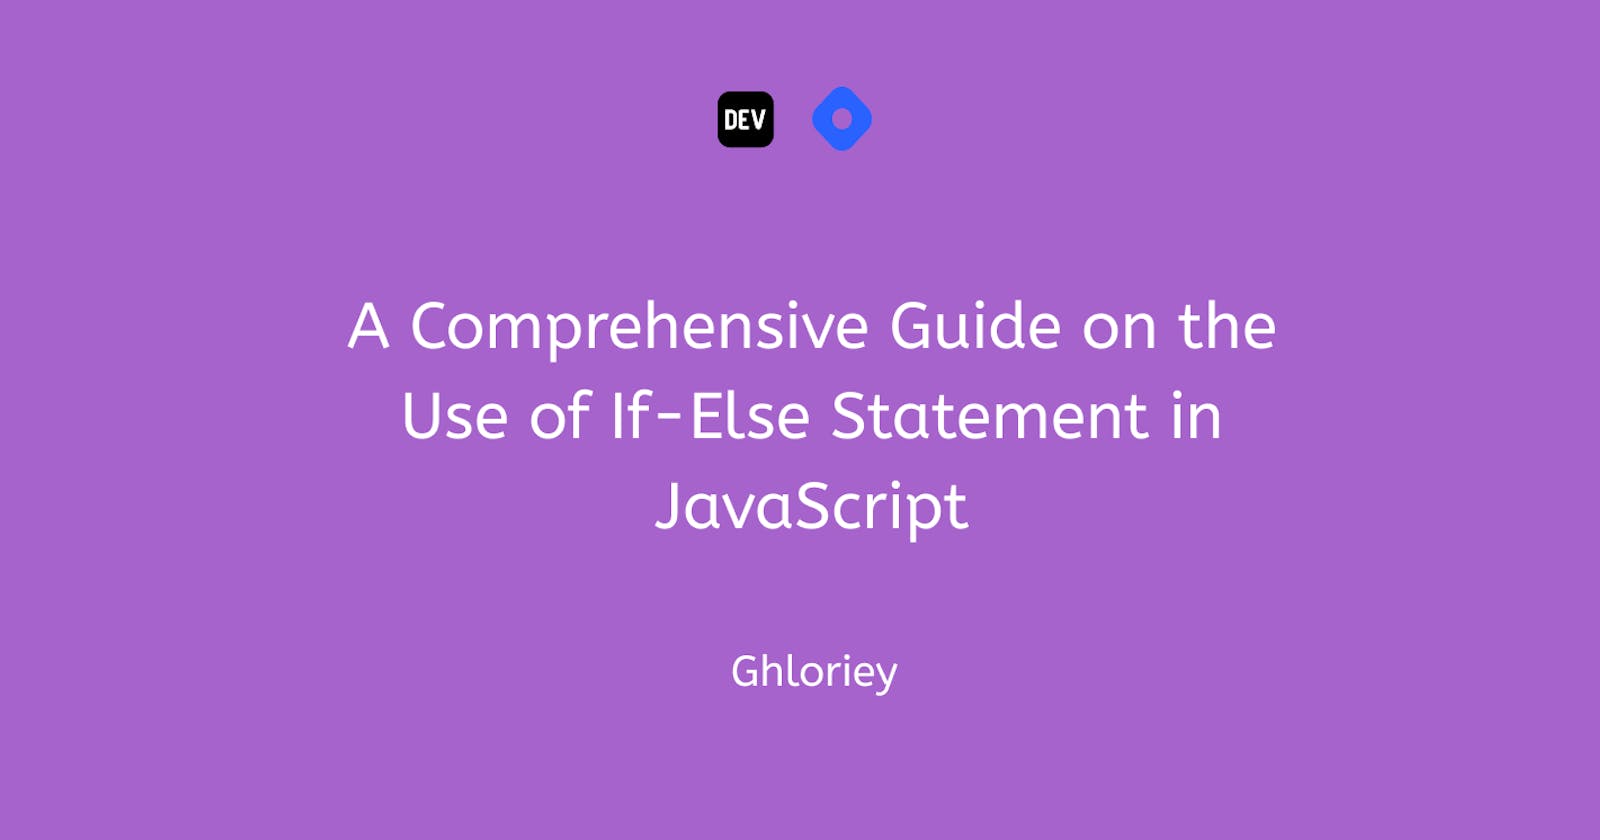 A Comprehensive Guide on the use of If-Else Statement in JavaScript